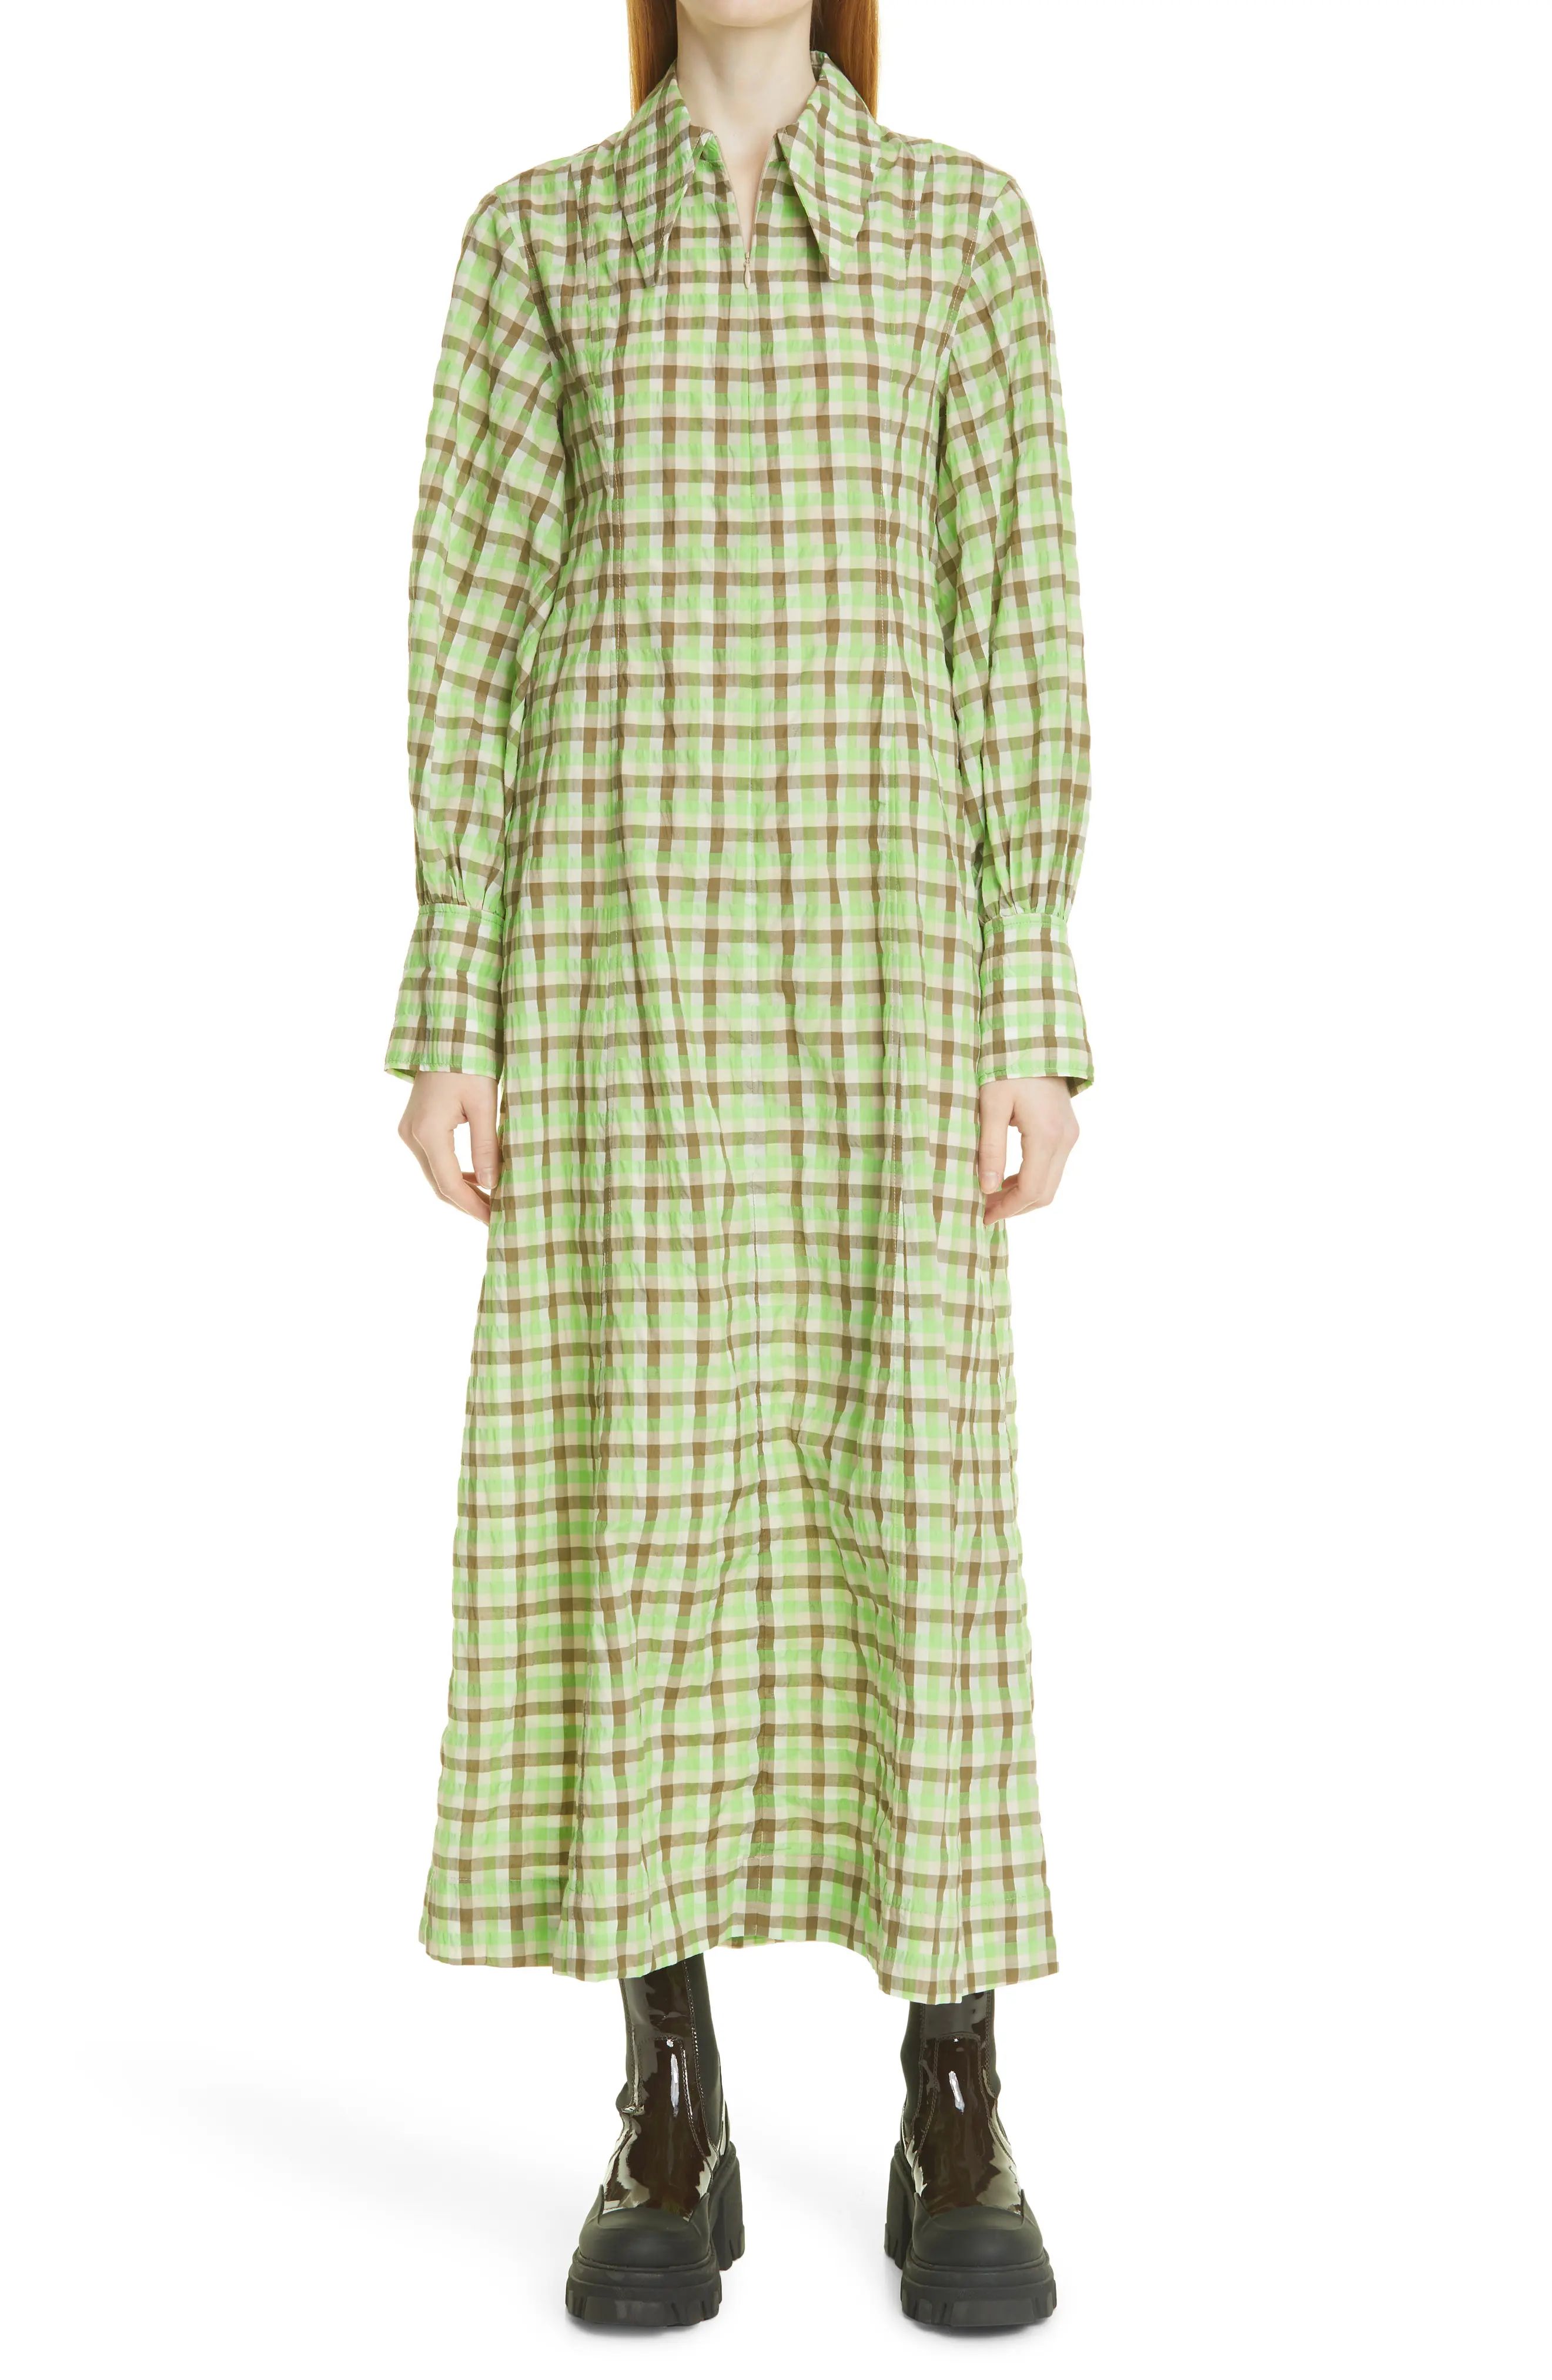 Ganni Plaid Long Sleeve Organic Cotton Blend Dress, Size 8 Us in Oyster Gray at Nordstrom | Nordstrom